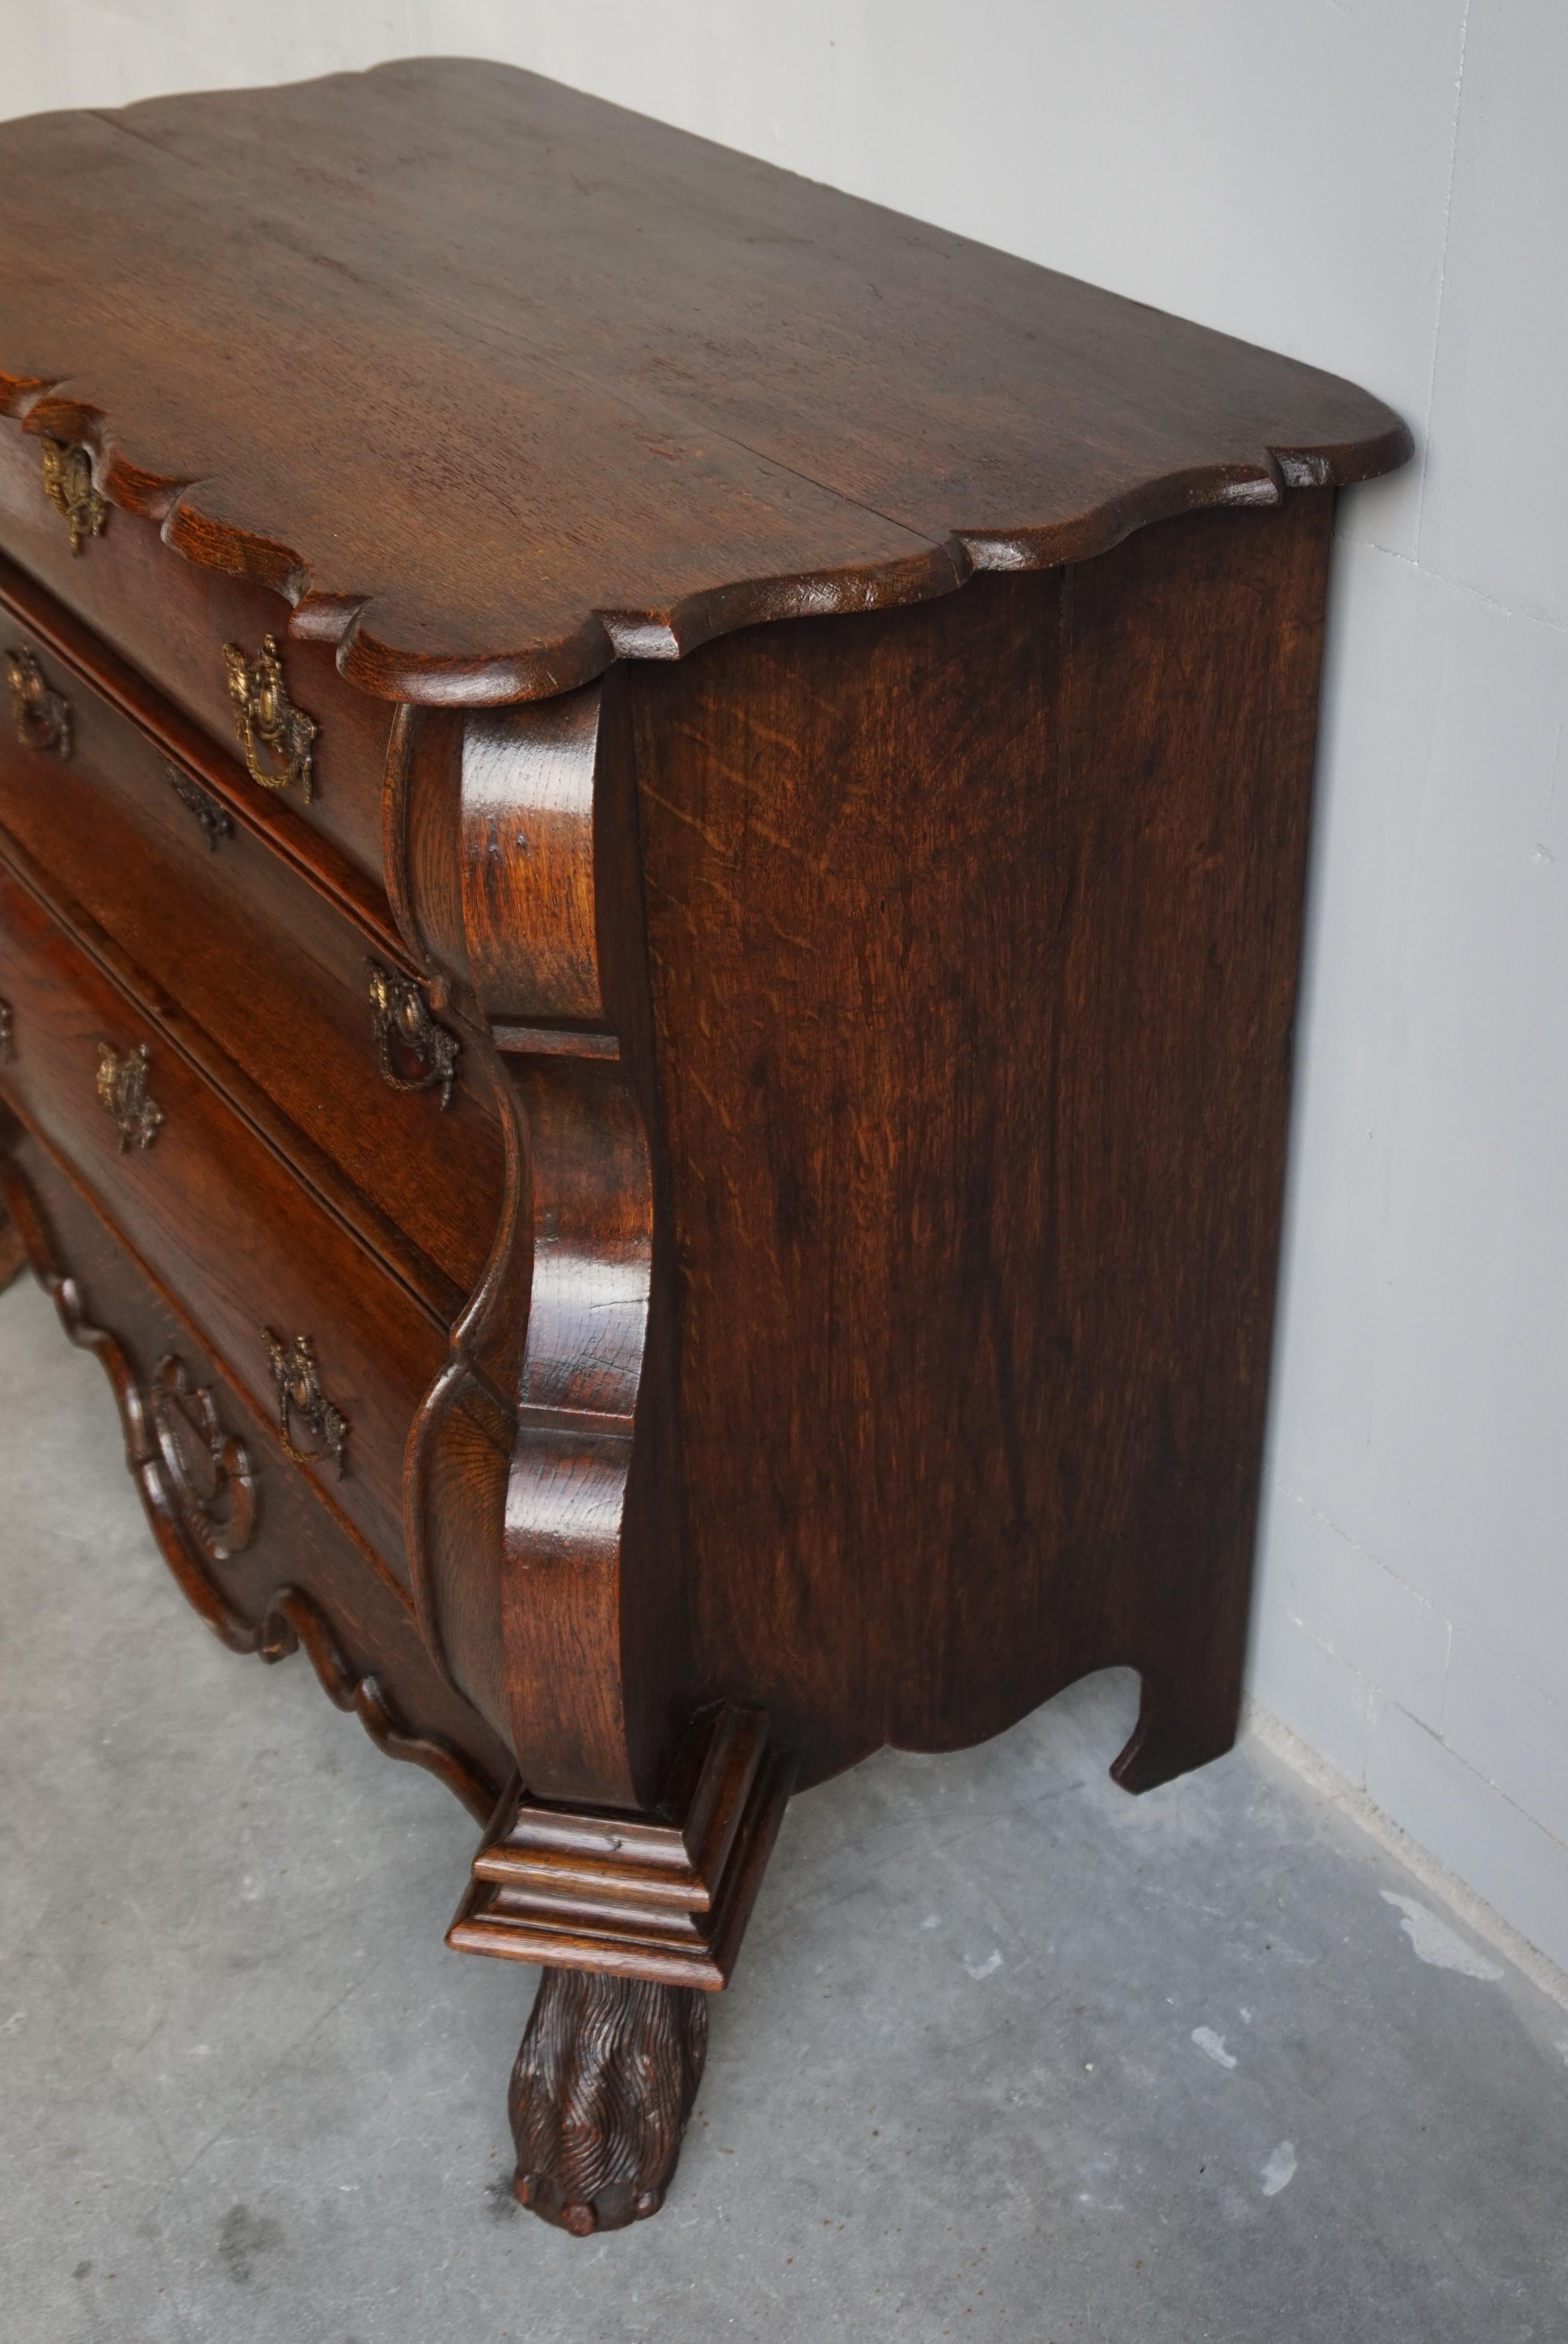 Antique 18th Century Dutch Rococo Oak Bomb Chest of Drawers with Claw Feet For Sale 10